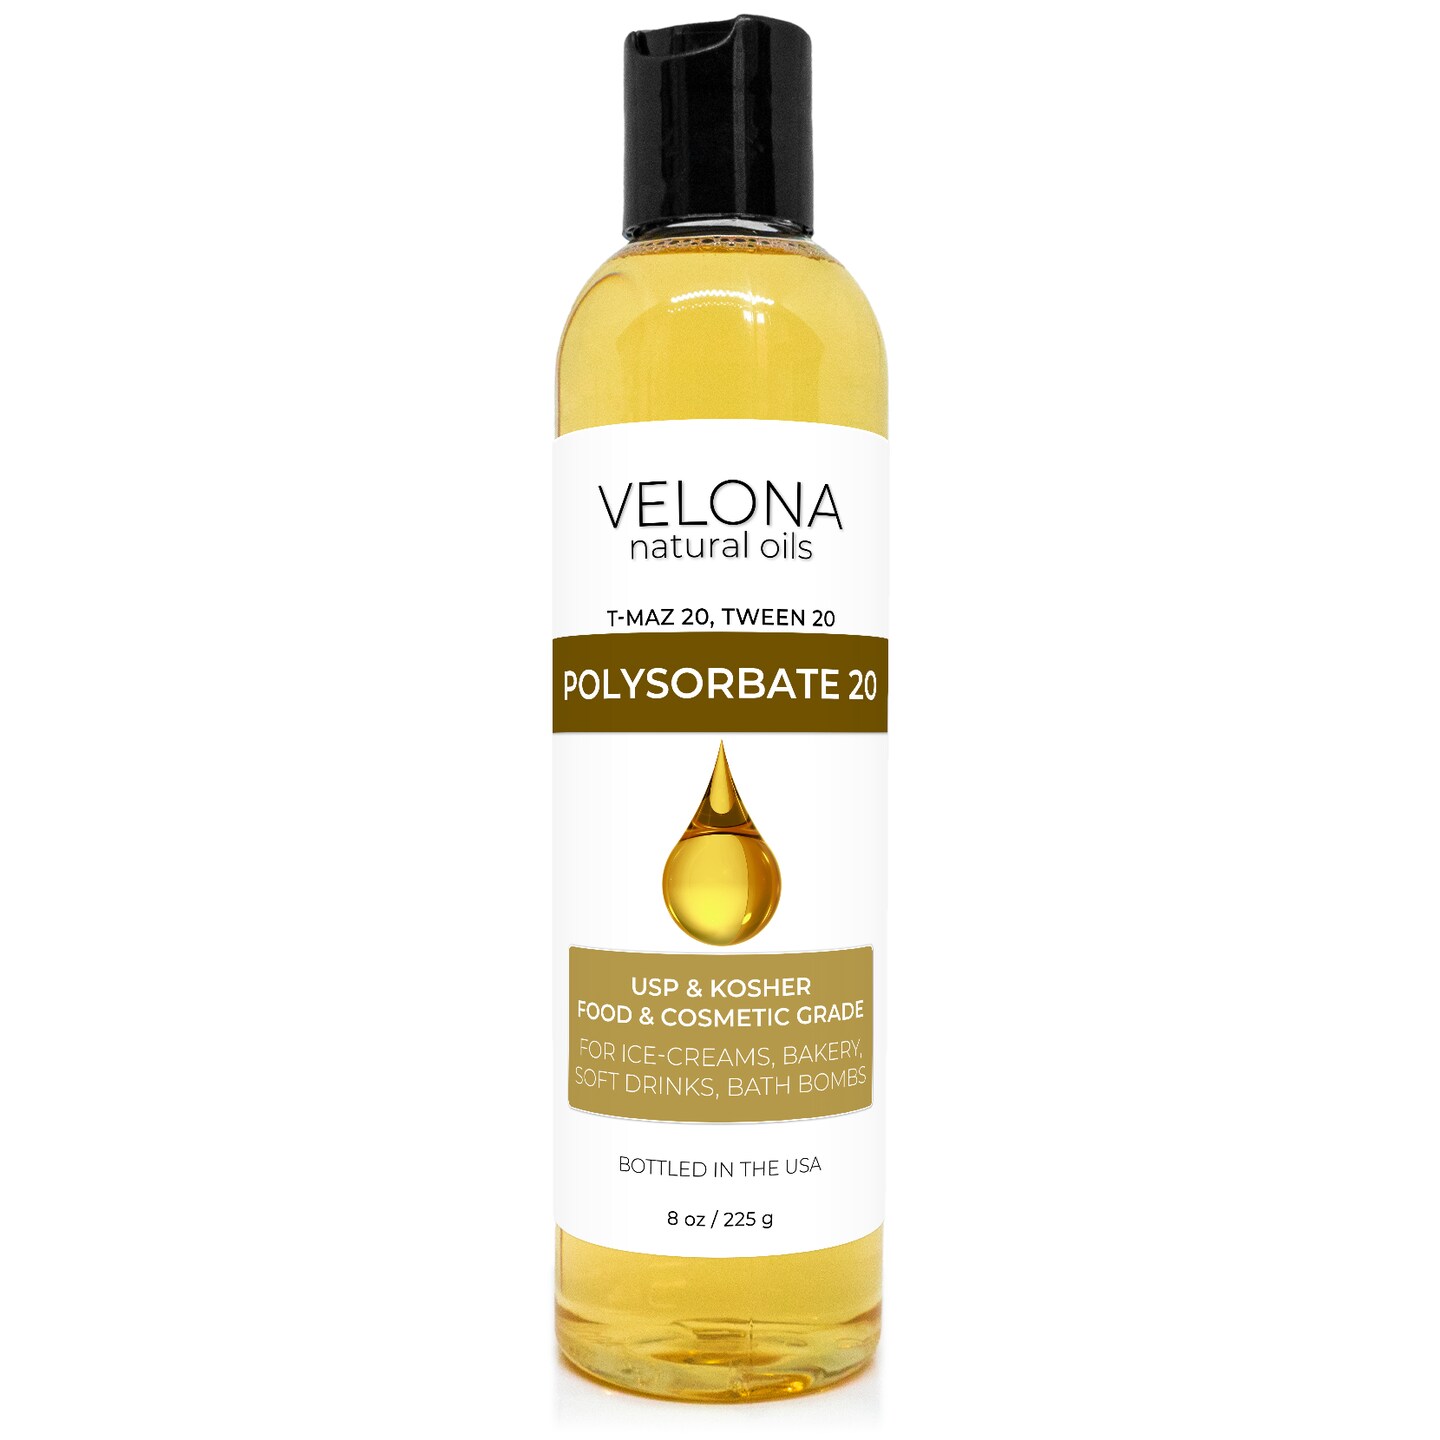 Polysorbate 20 by Velona - 8 oz | Solubilizer, Food &#x26; Cosmetic Grade | All Natural for Cooking, Skin Care and Bath Bombs | Use Today - Enjoy Results